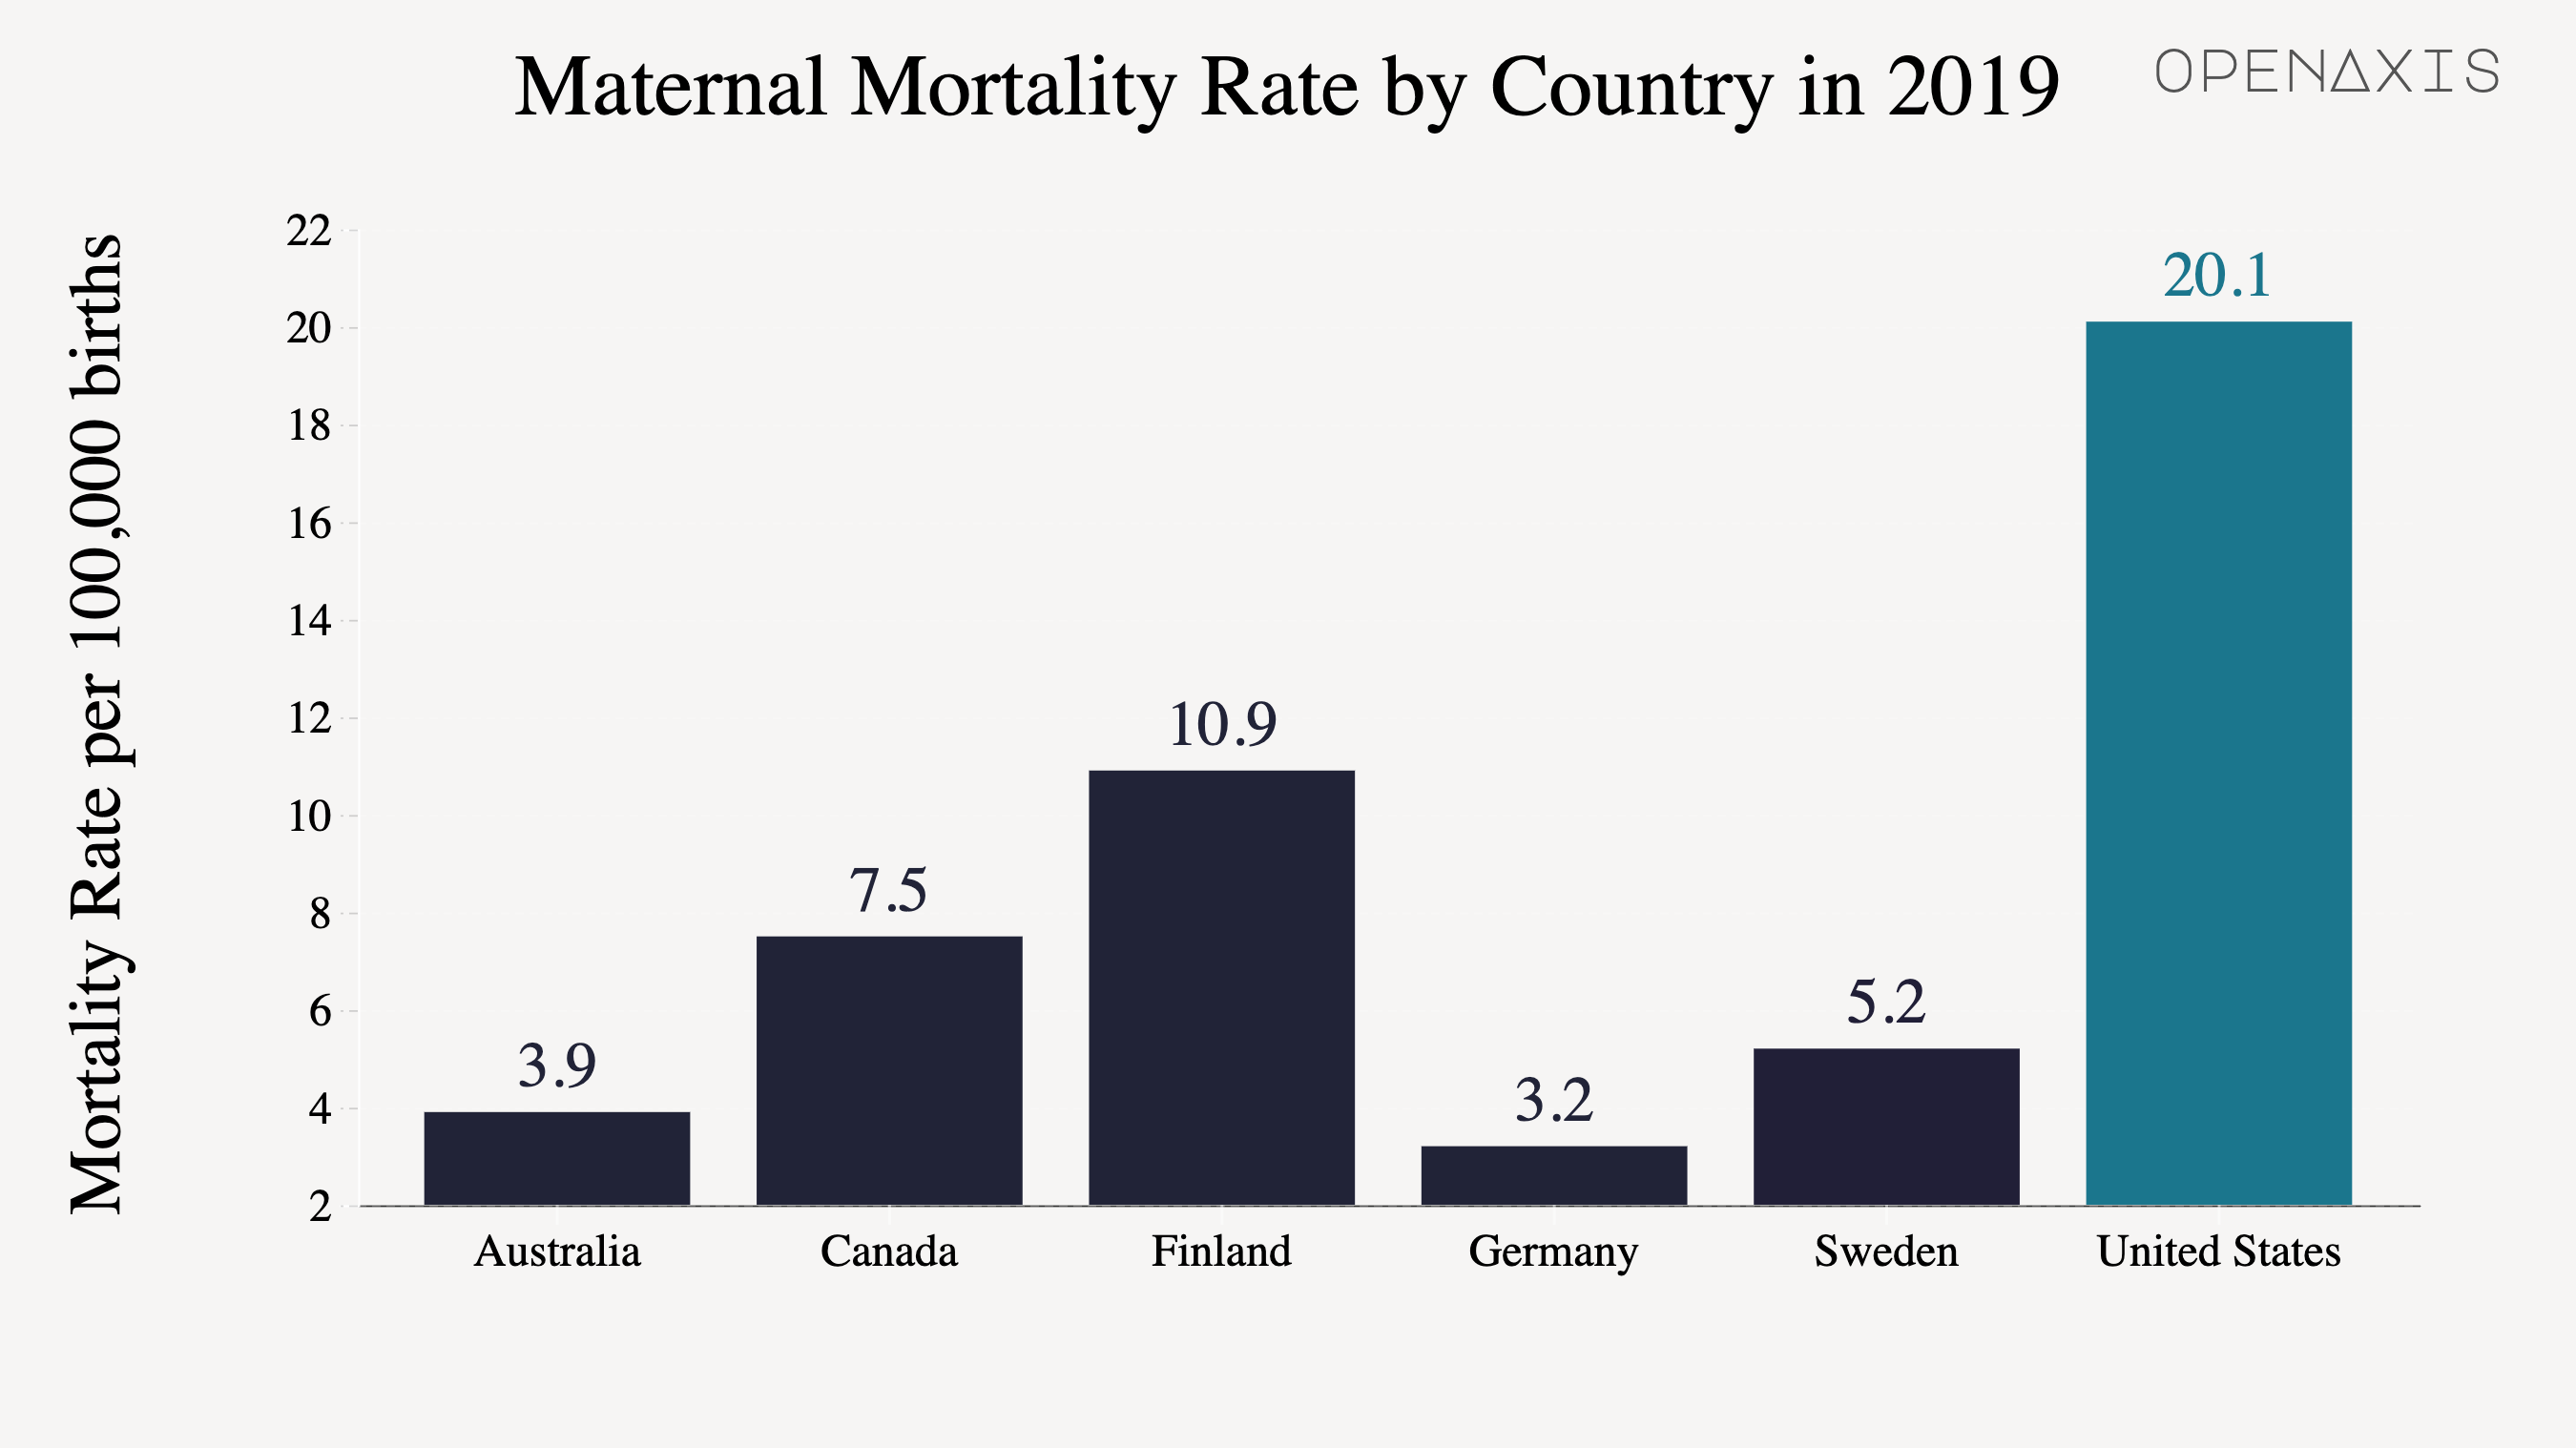 <p>The U.S. has the <a href="https://www.commonwealthfund.org/publications/issue-briefs/2020/nov/maternal-mortality-maternity-care-us-compared-10-countries#1" target="_blank">highest</a> maternal mortality rate among developed countries. More info on the data can be found <a href="https://stats.oecd.org/index.aspx?queryid=30116#" target="_blank">here</a>. In addition, the U.S. is the <a href="https://thehill.com/blogs/congress-blog/3483343-100-million-more-births-still-no-national-paid-leave/" target="_blank">only</a> developed country that does not guarantee paid maternity leave for all parents. </p><p><br /></p><p>Current U.S. Policies for parental leave include the 1993 <a href="https://www.dol.gov/general/topic/benefits-leave/fmla" target="_blank">Family and Medical Leave Act</a> (FMLA): "employers with 50 or more workers provide 12 weeks of unpaid leave annually", The Federal Employee Paid Leave Act, the Families First Coronavirus Response Act (FFCRA), and some <a href="https://www.healthaffairs.org/do/10.1377/forefront.20211021.197121" target="_blank">State programs</a>.</p><p><br /></p><p>Source: Organisation for Economic Co-operation and Development (OECD) &amp; the Center for Disease Control (CDC)</p>